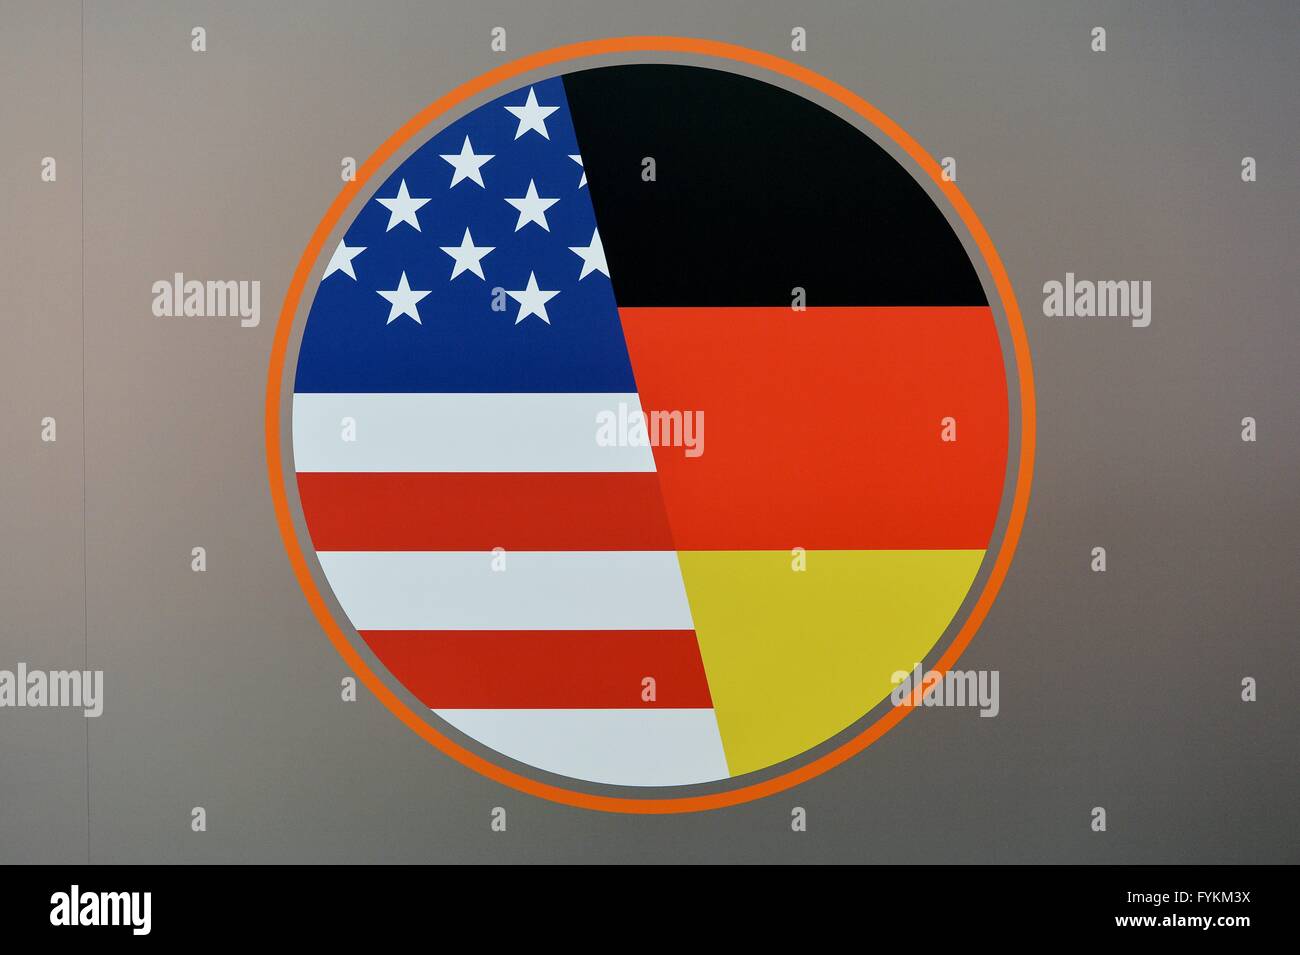 The german and the us-american flag are printed together in a circle, Germany, city of Hannover, 25. April 2016. Photo: Frank May Stock Photo